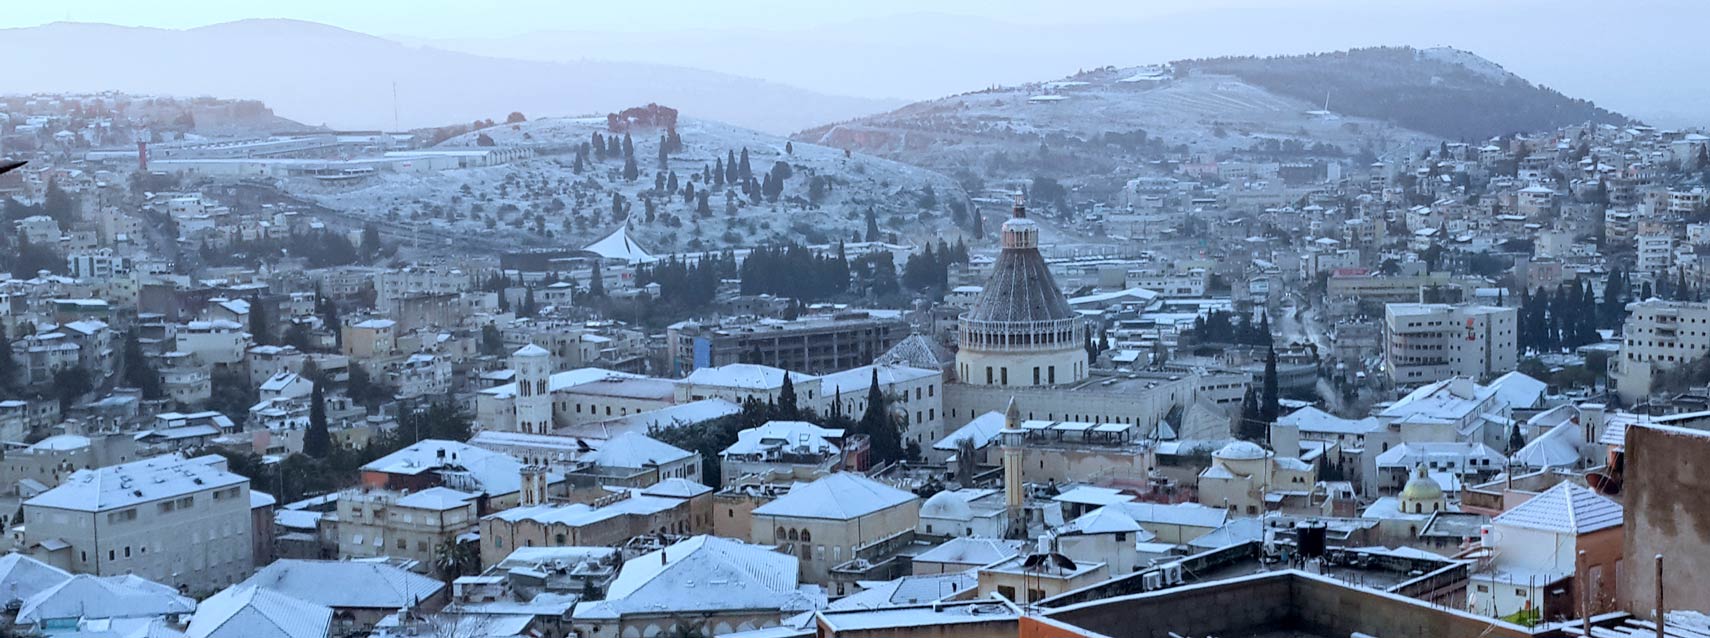 Snow in the city of Nazareth in Israel